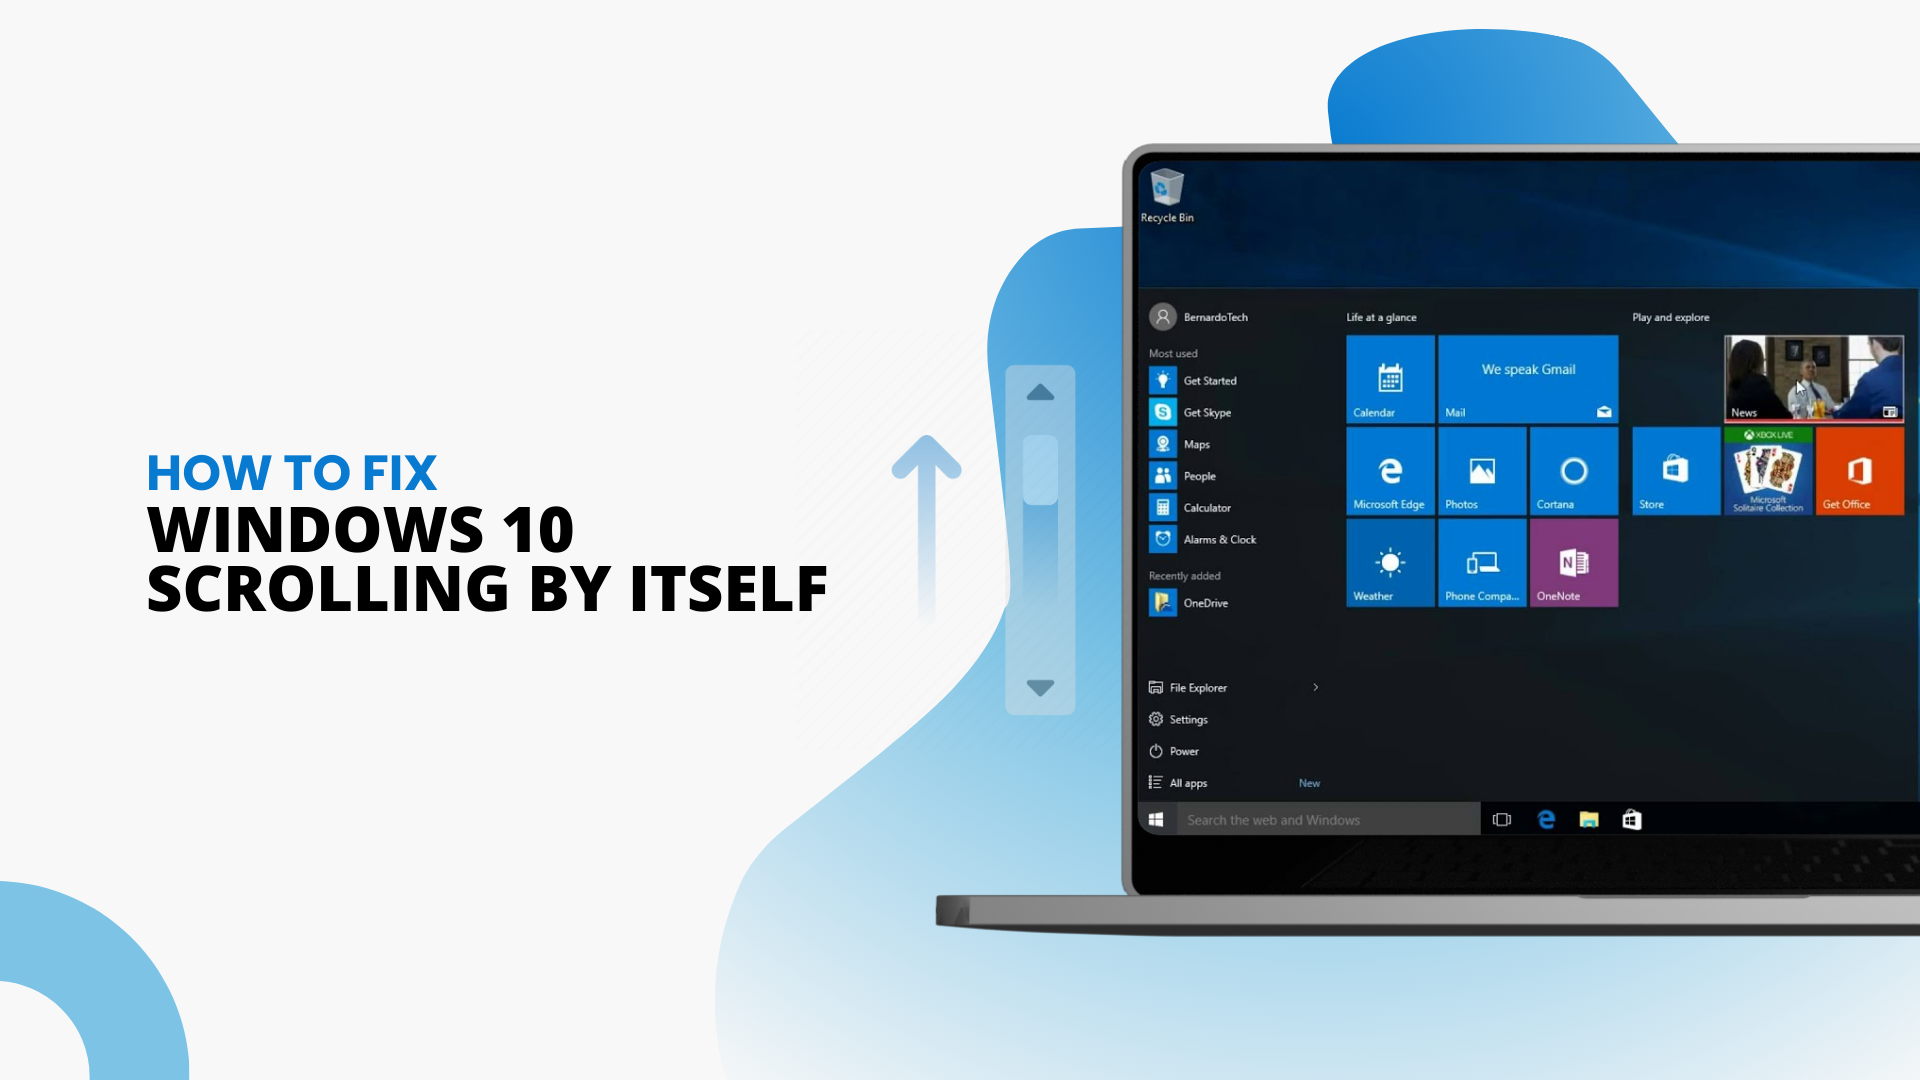 How To Fix Windows 10 Scrolling by Itself